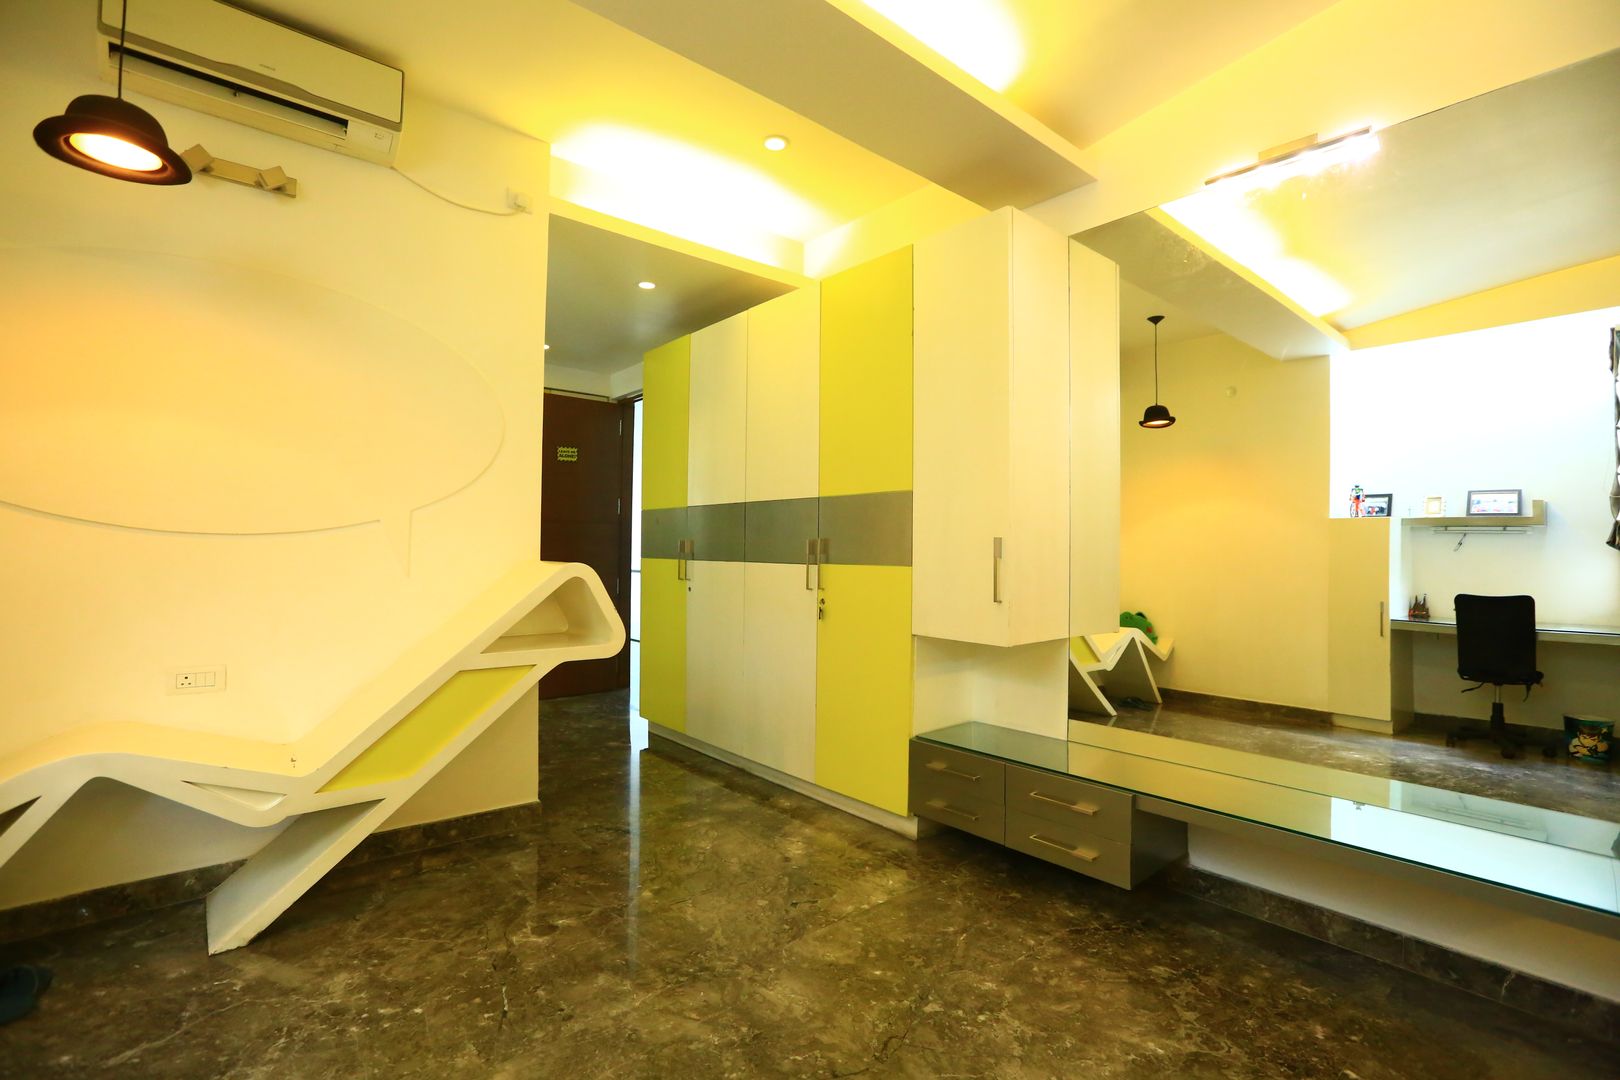 Residence at Sarjapur Road, Space Trend Space Trend Dormitorios modernos